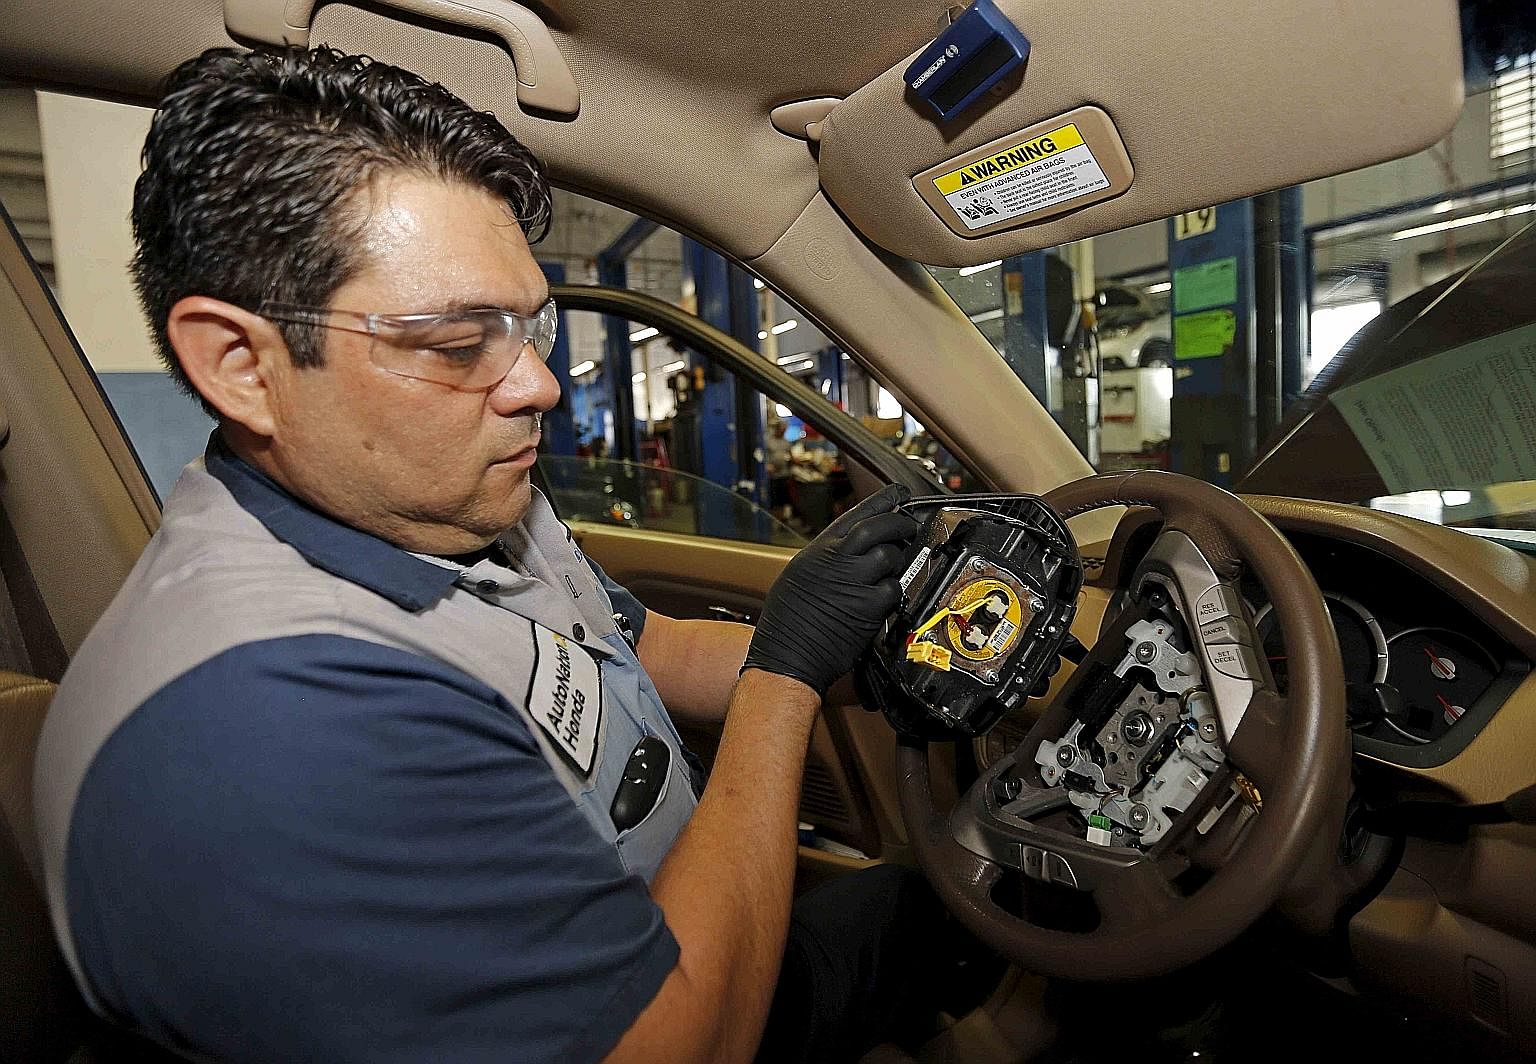 Technician Edward Bonilla holding a recalled Takata airbag inflator after removing it from a Honda car at a dealership service department in Miami, Florida.